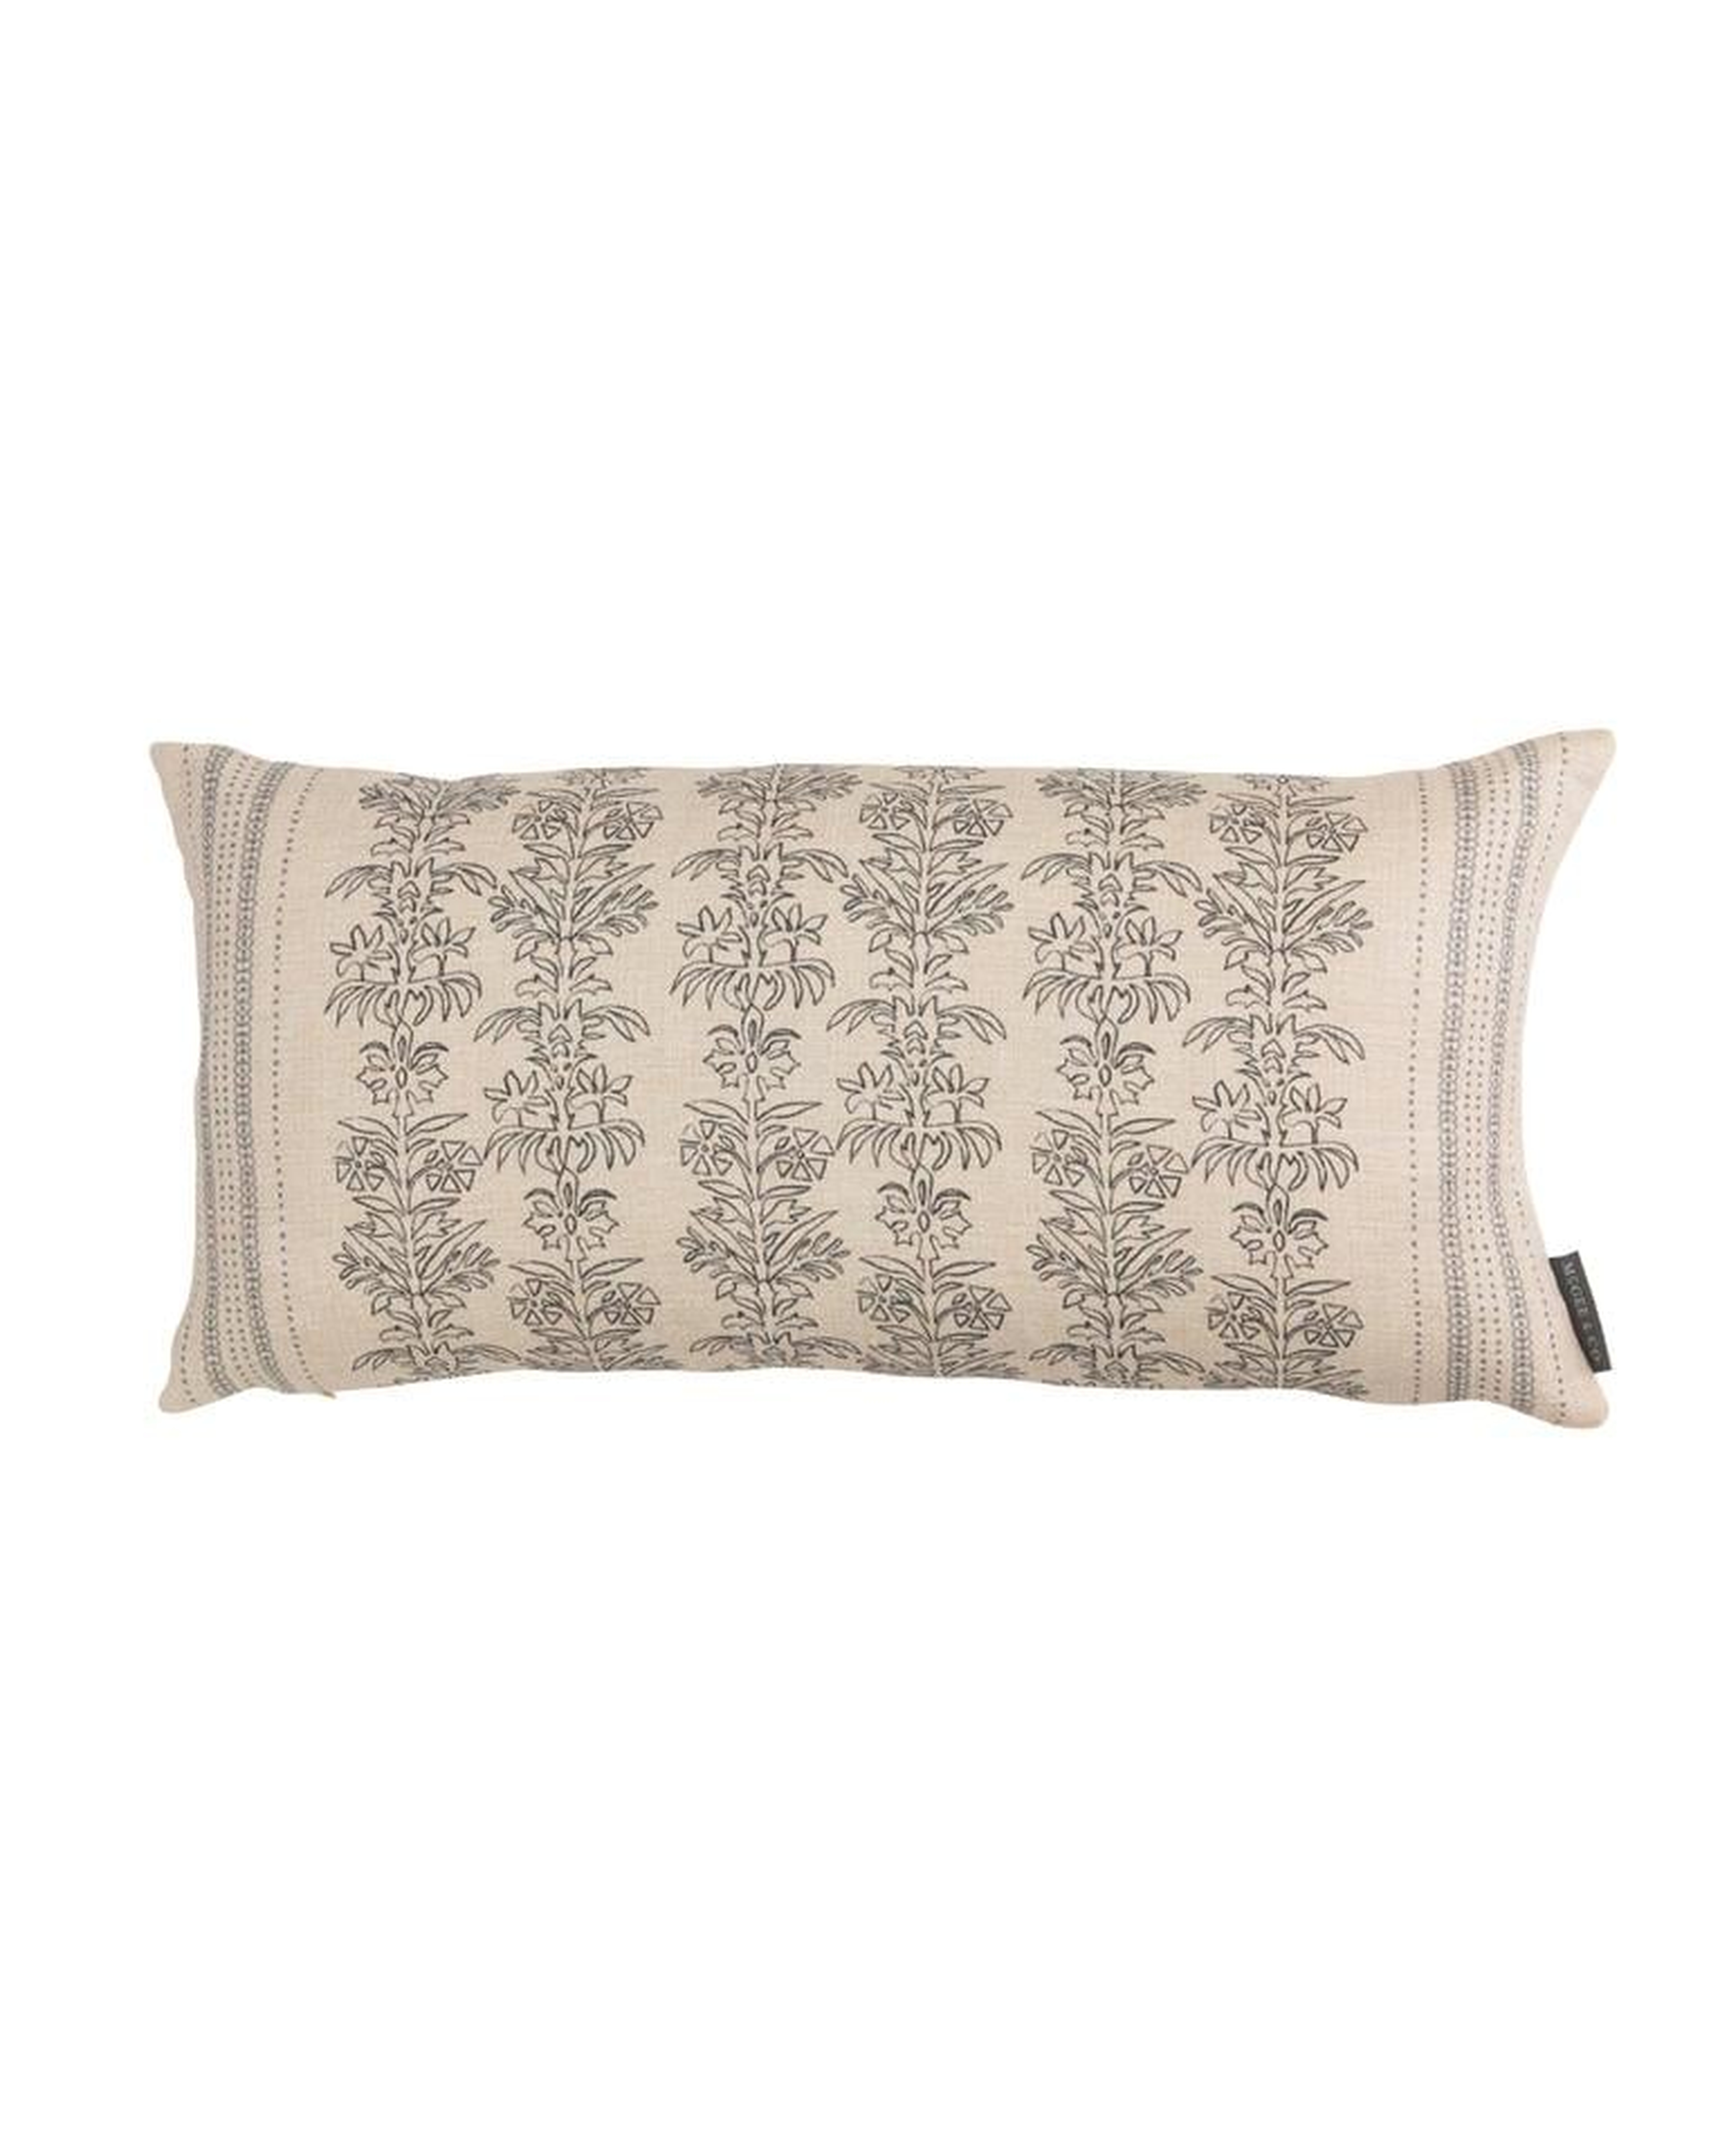 Demi Floral Stripe Pillow Cover, 12" x 24" - McGee & Co.